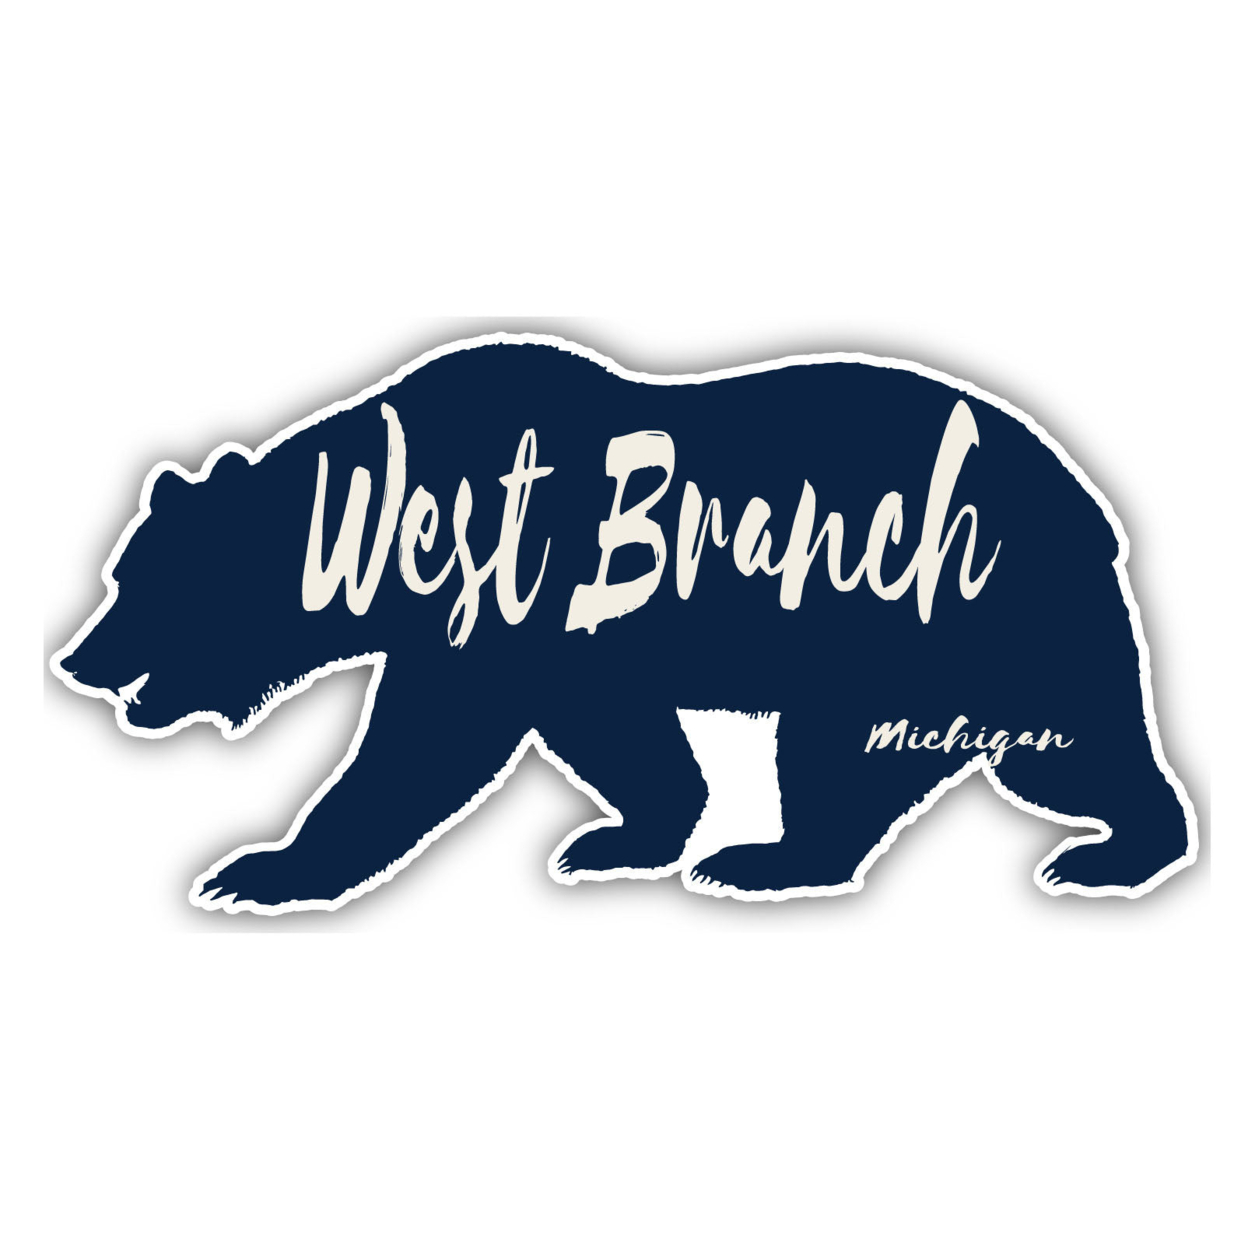 West Branch Michigan Souvenir Decorative Stickers (Choose Theme And Size) - Single Unit, 4-Inch, Great Outdoors